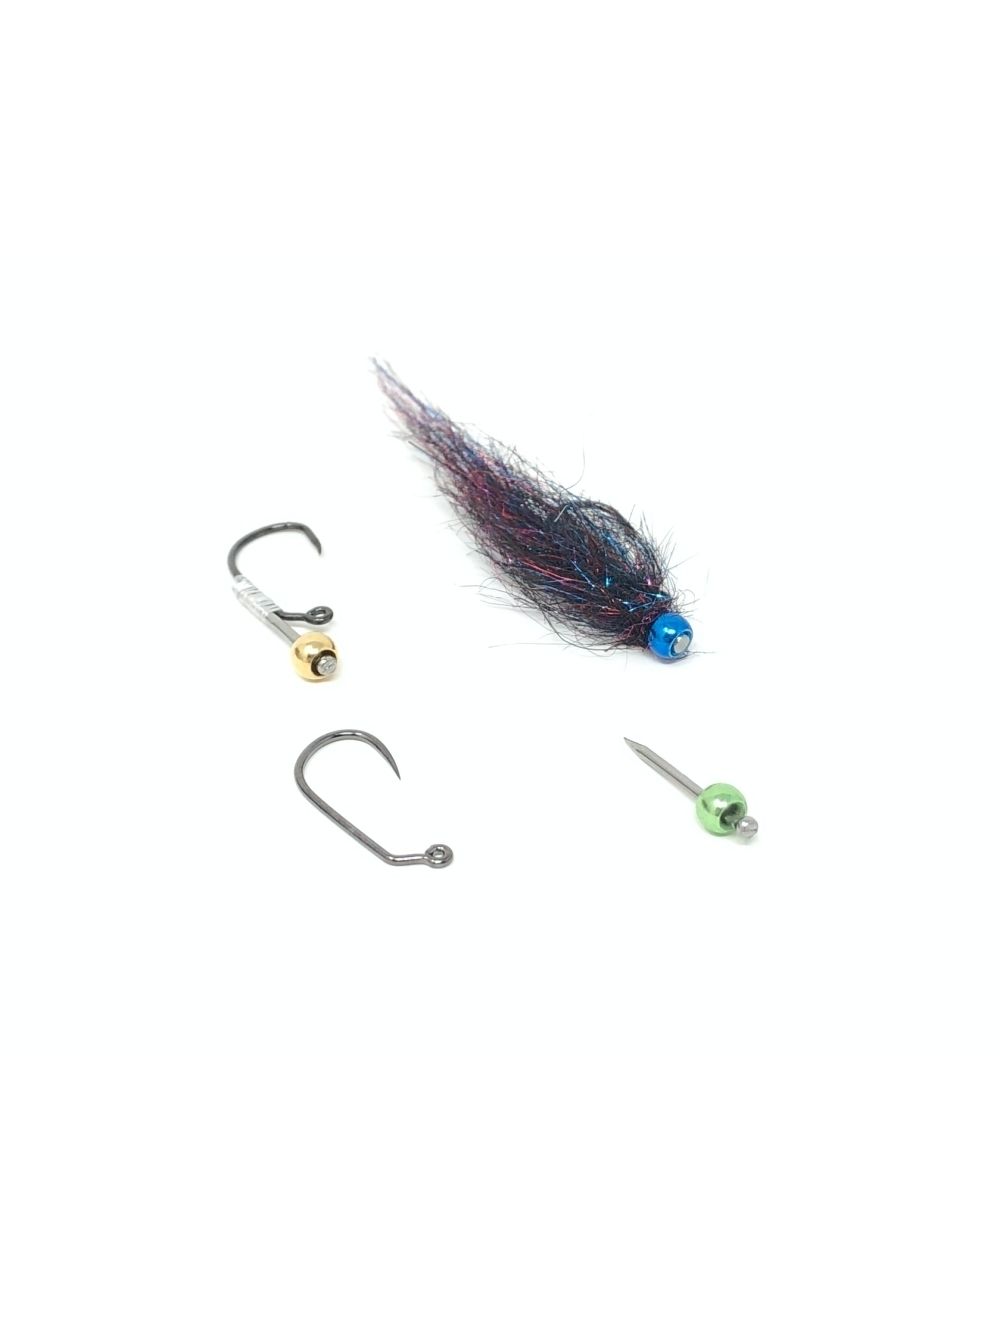 Balanced Leech Fly Pattern for Bass Fly Fishing - Blog TheFlyStop